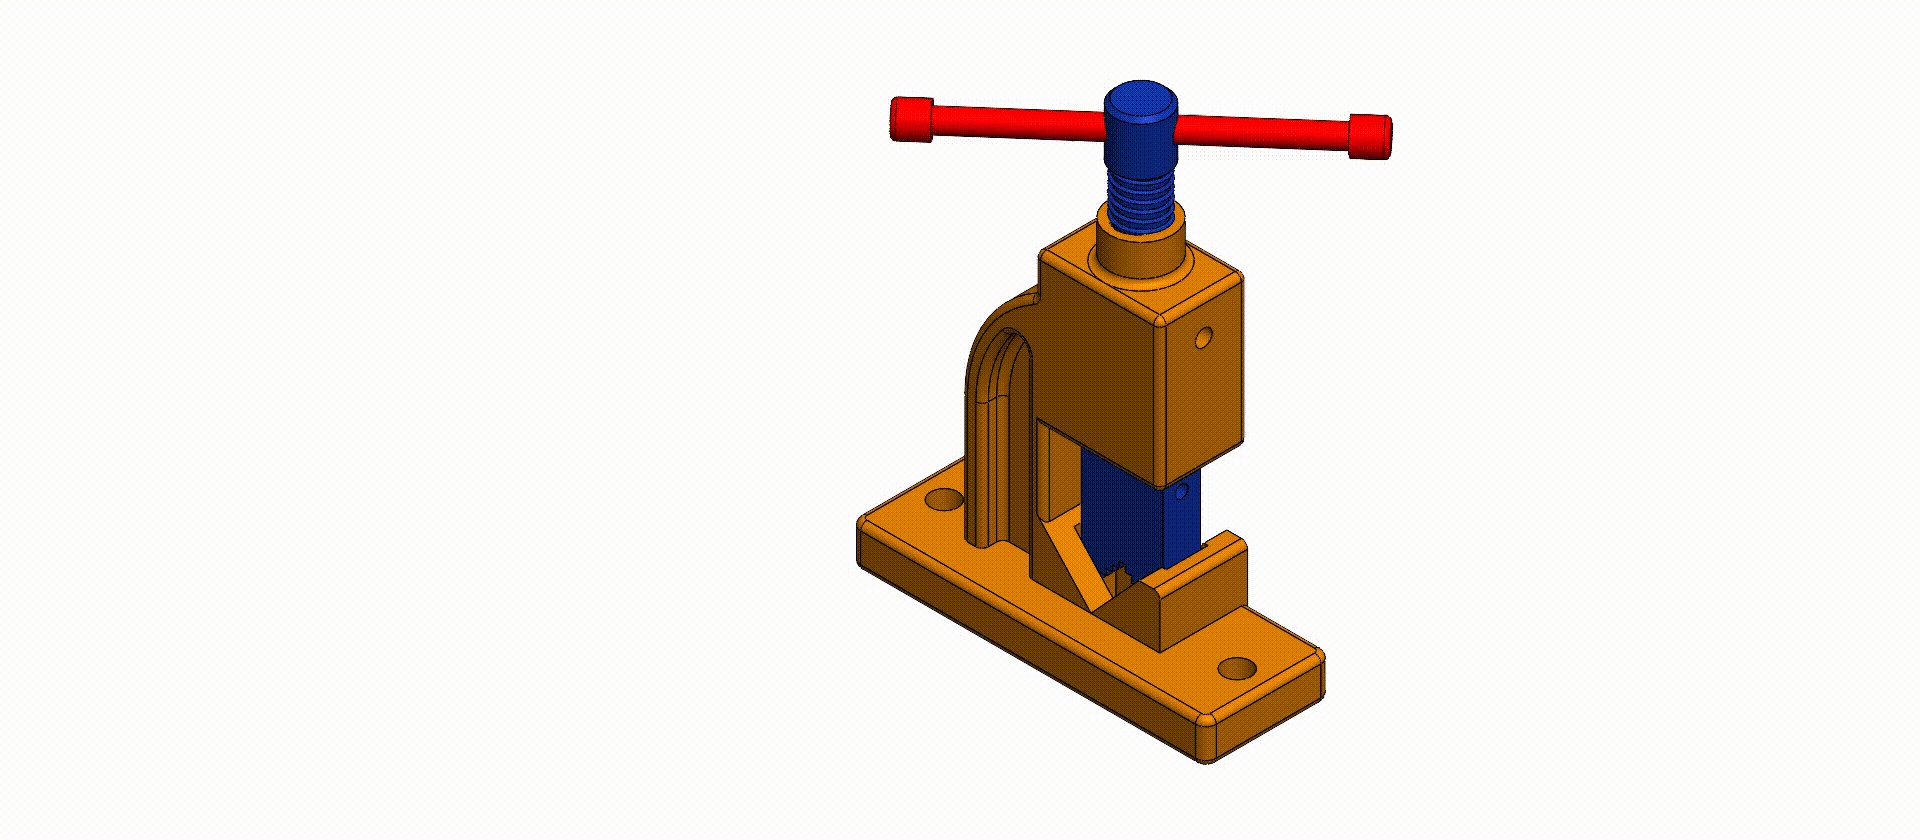 ARSH HOME POINT - PIPE VICE ASSEMBLY.🧩 Isometric view with balloon &  BOM.🔥 If u need drawing of parts. Comment below👇 | Facebook